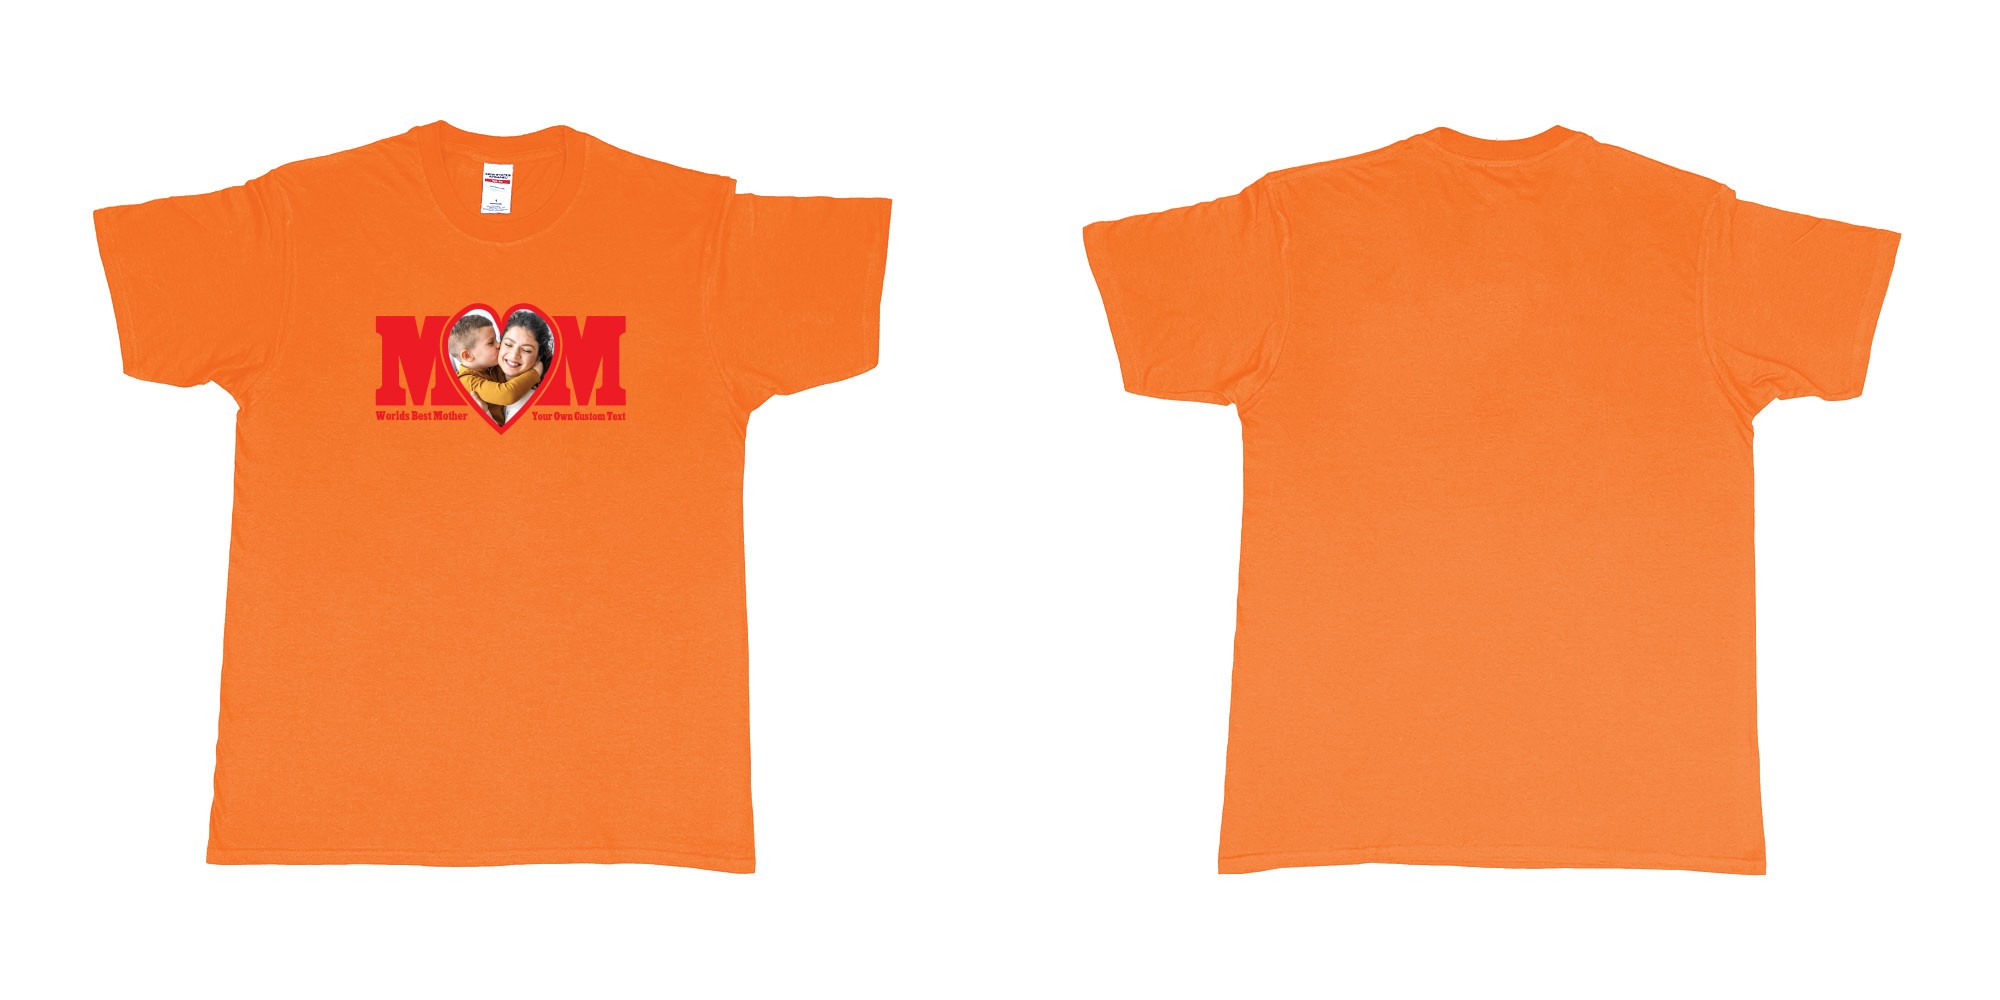 Custom tshirt design world best mother personalized picture and text in fabric color orange choice your own text made in Bali by The Pirate Way